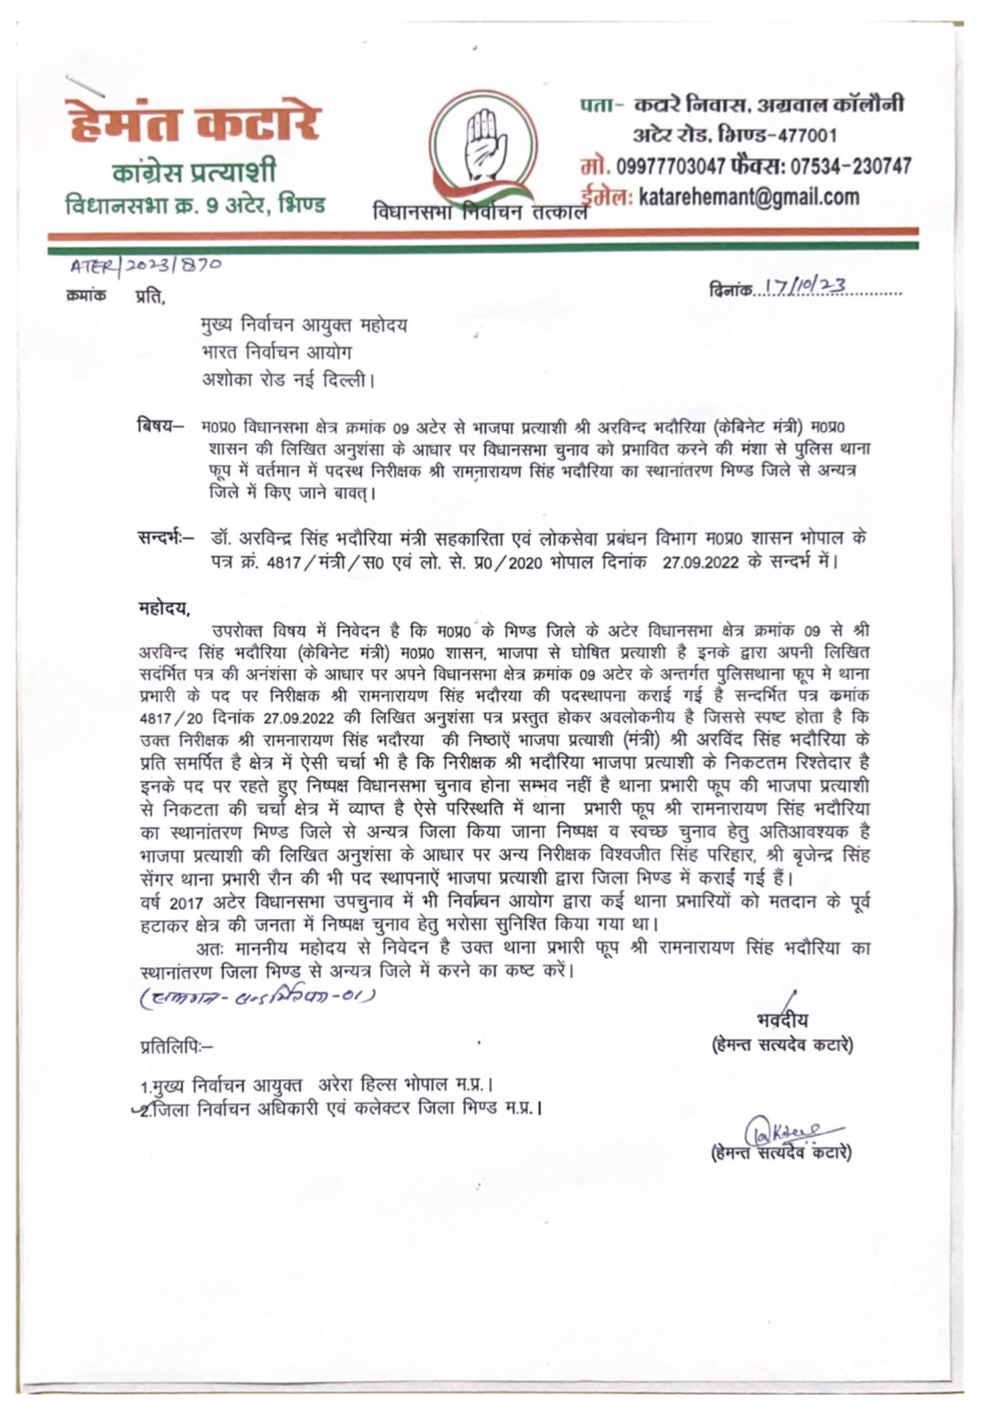 Hemant Katare complained to EC